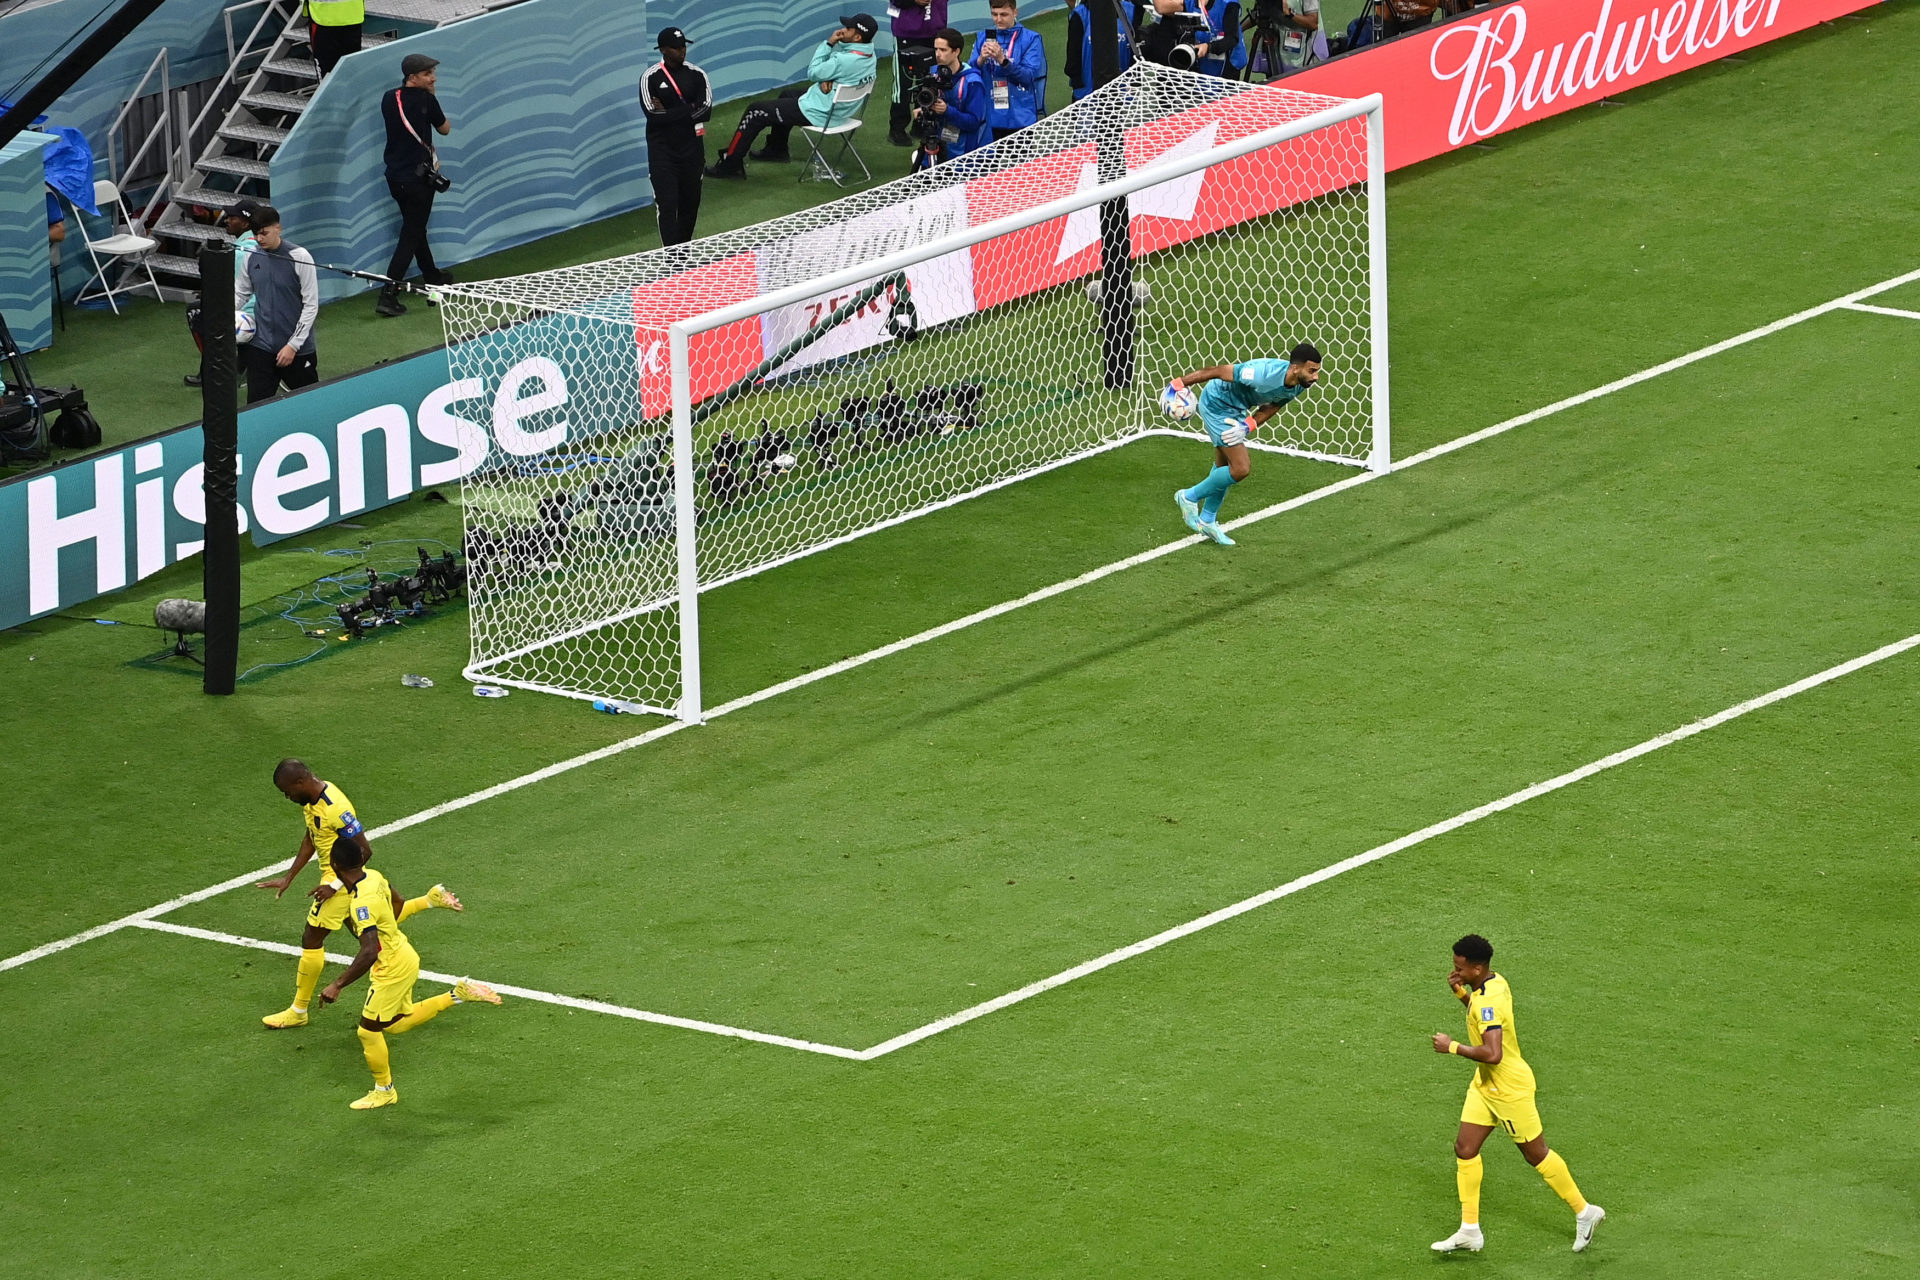 Ex-West Ham cult hero takes centre stage scoring World Cup opening goal